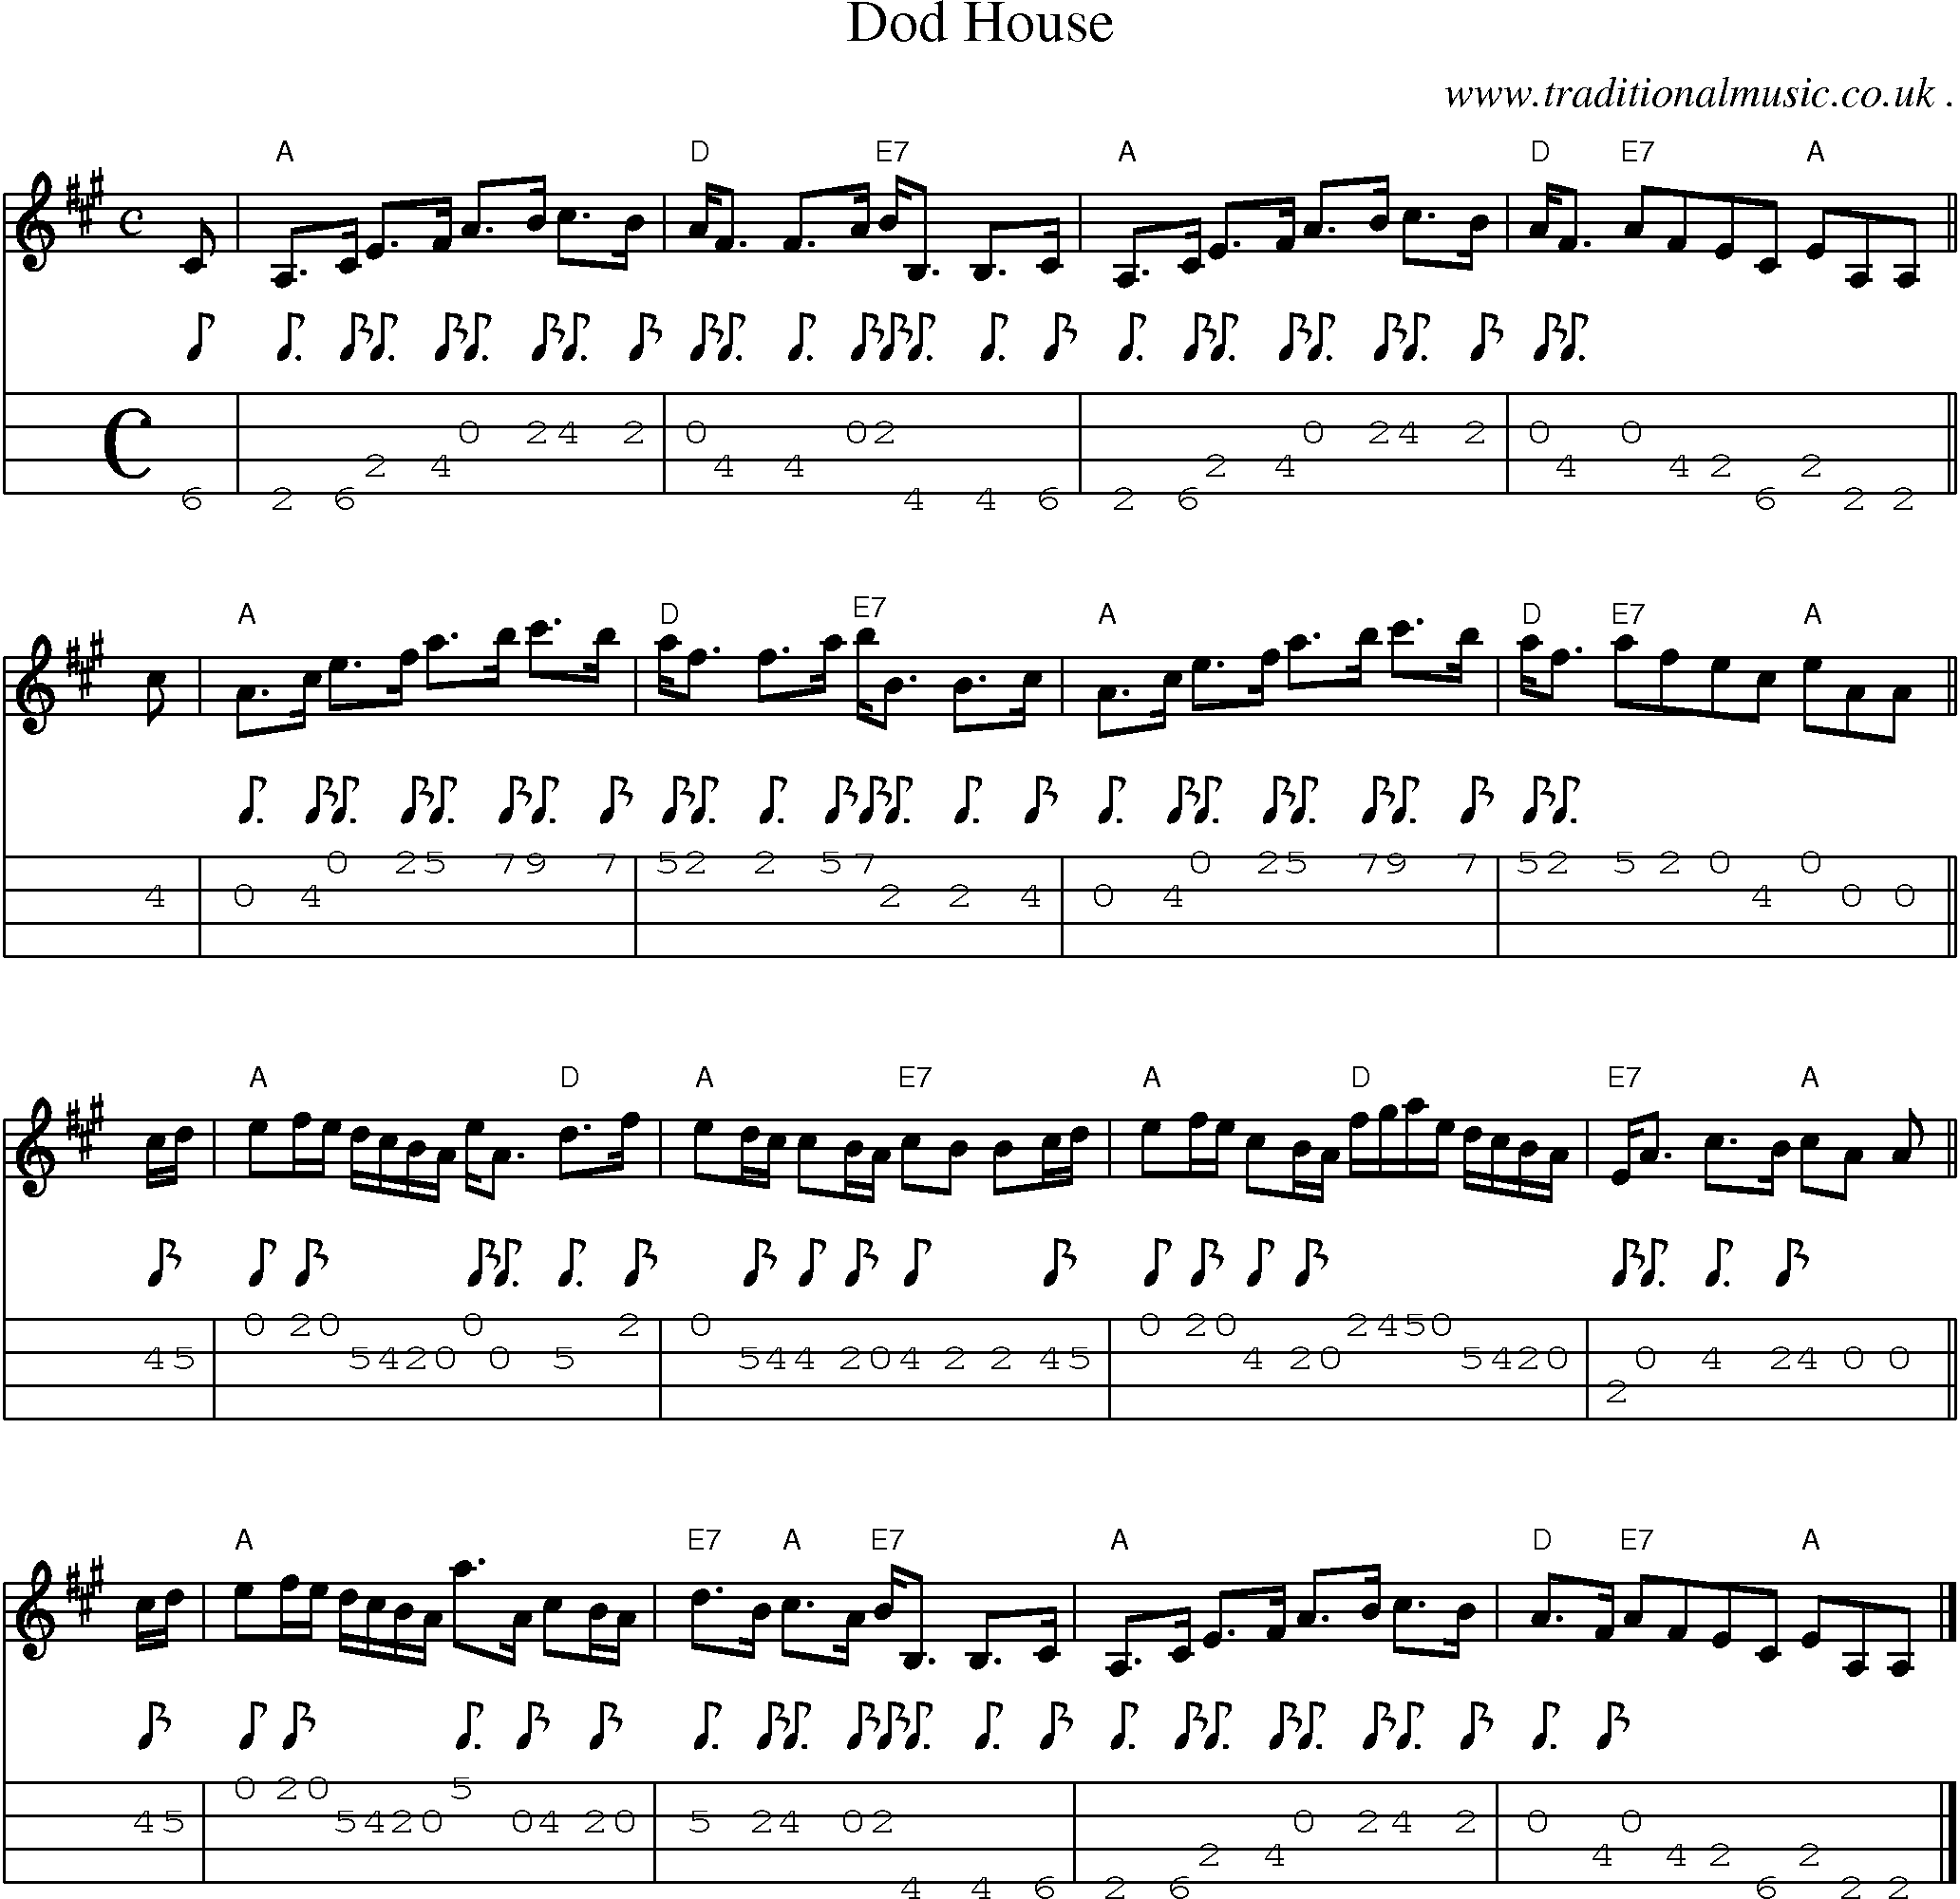 Sheet-music  score, Chords and Mandolin Tabs for Dod House